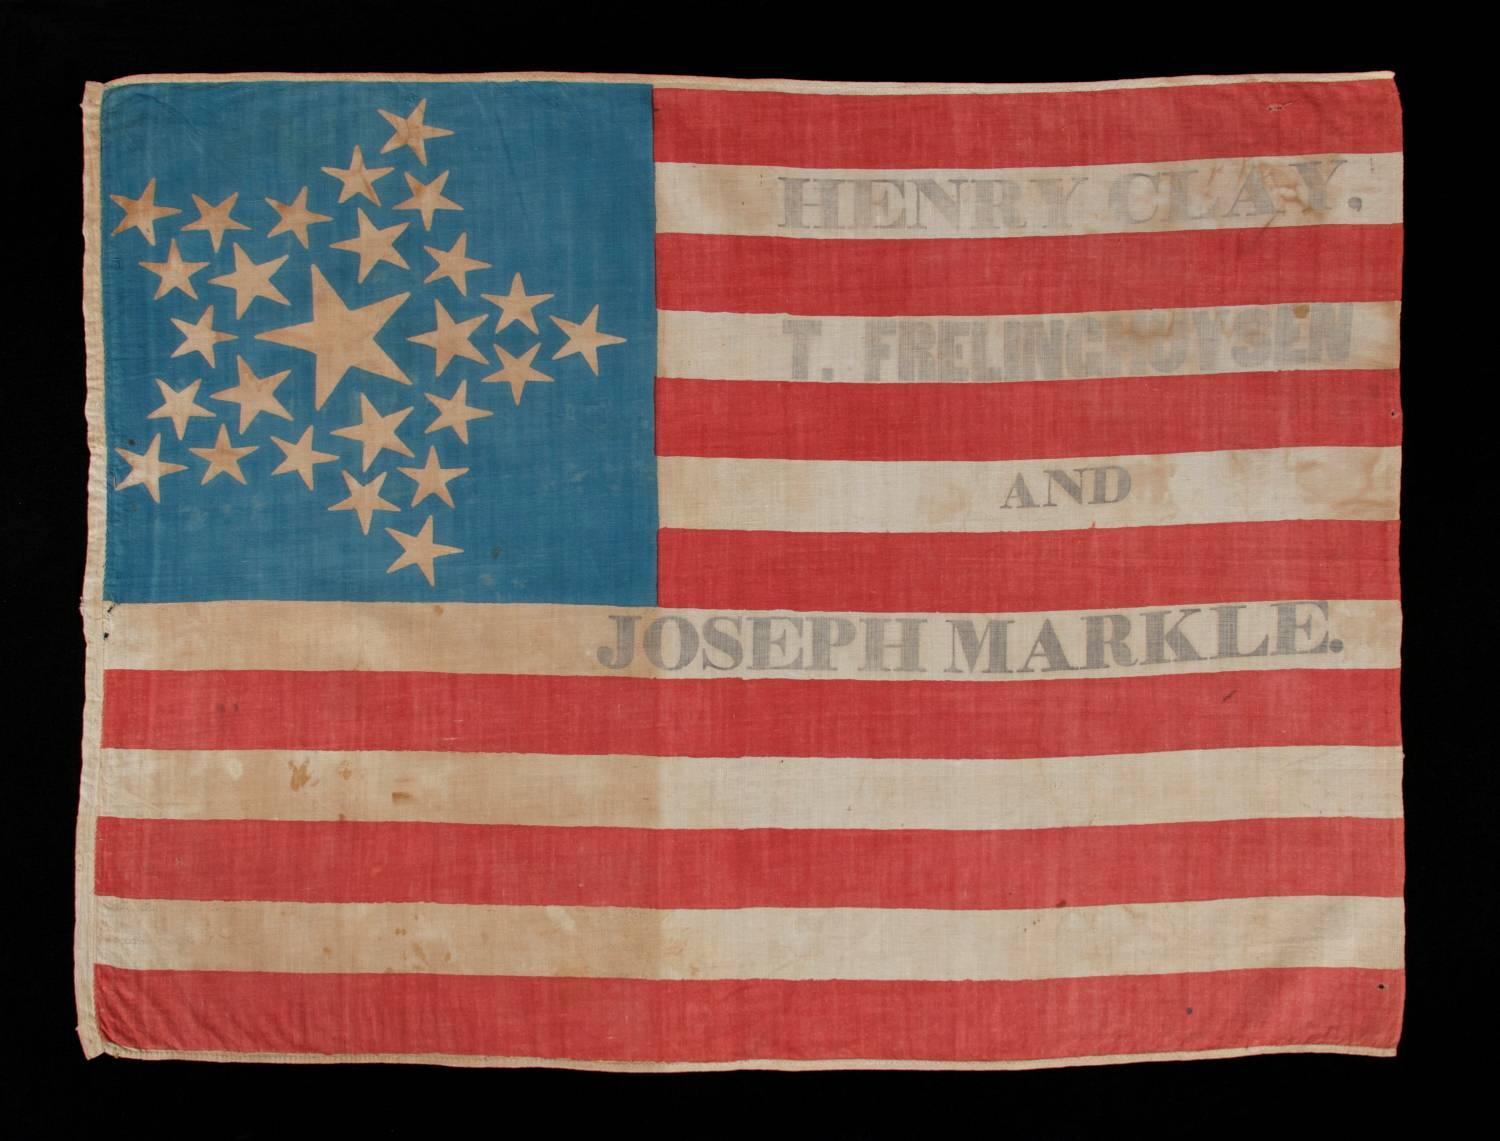 26 Stars, made for the 1844 presidential campaign of Henry Clay & Theodore Frelinghuysen, with a beautiful great star configuration and the very rare presence of a third candidate, Henry marble, who was running for governor in Pennsylvania; one of